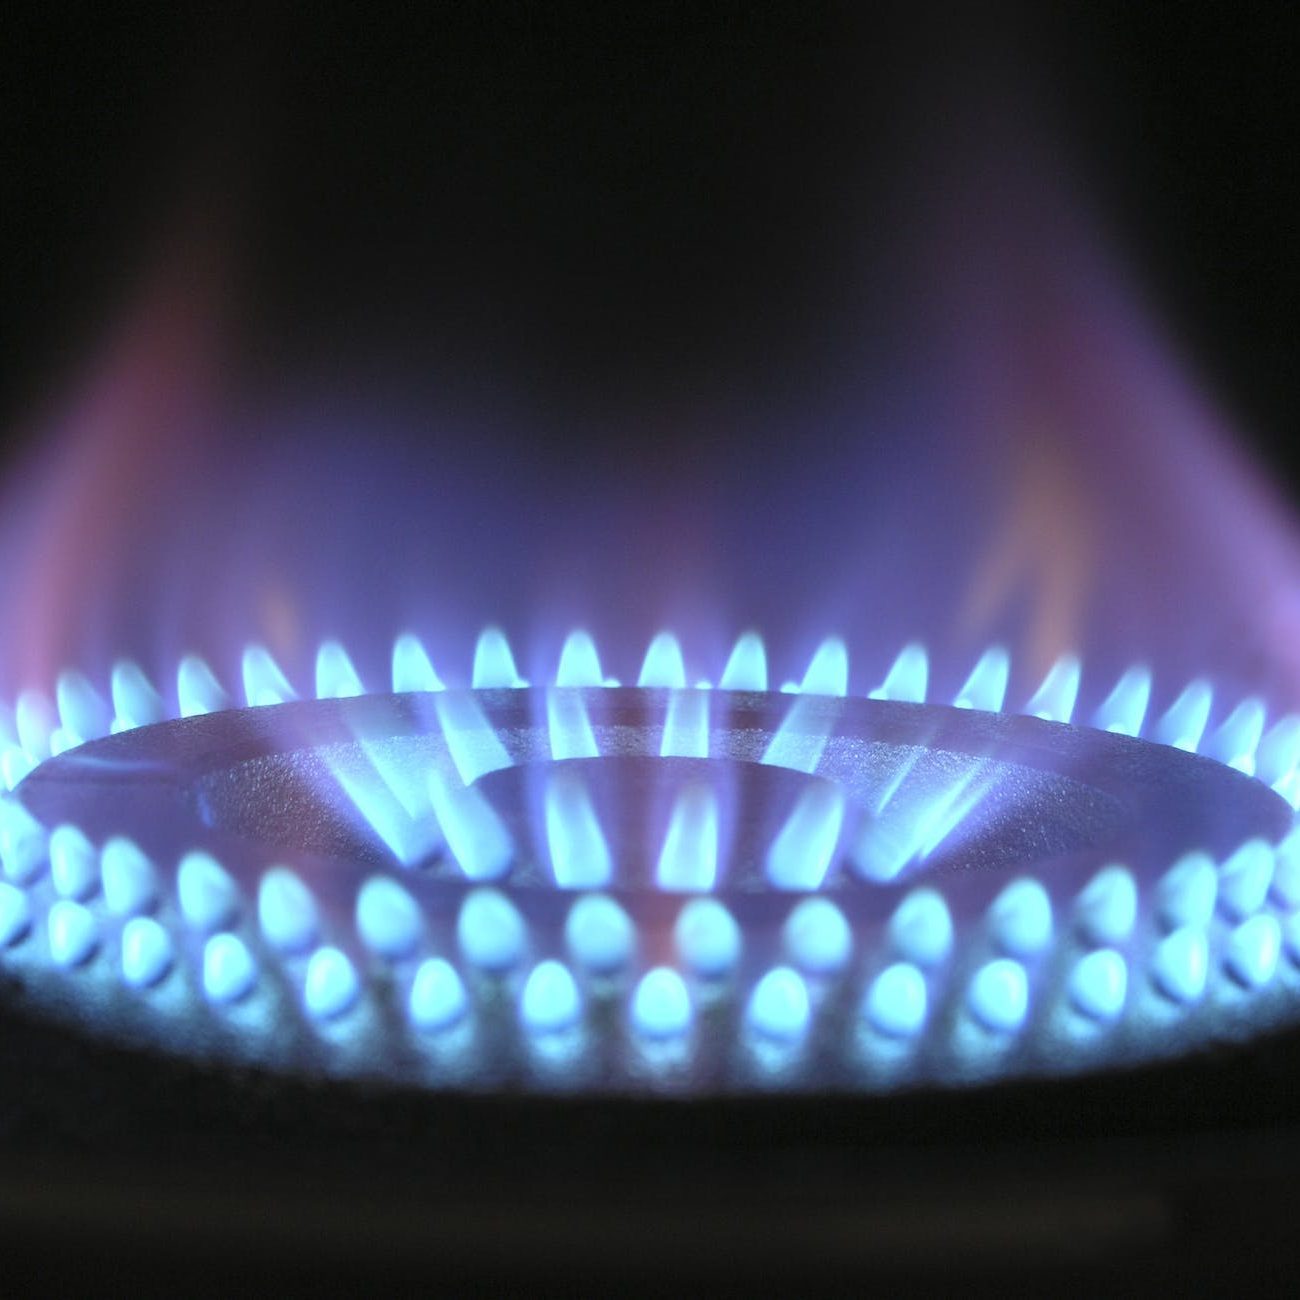 Photo by Pixabay on <a href="https://www.pexels.com/photo/burning-stove-266896/" rel="nofollow">Pexels.com</a>